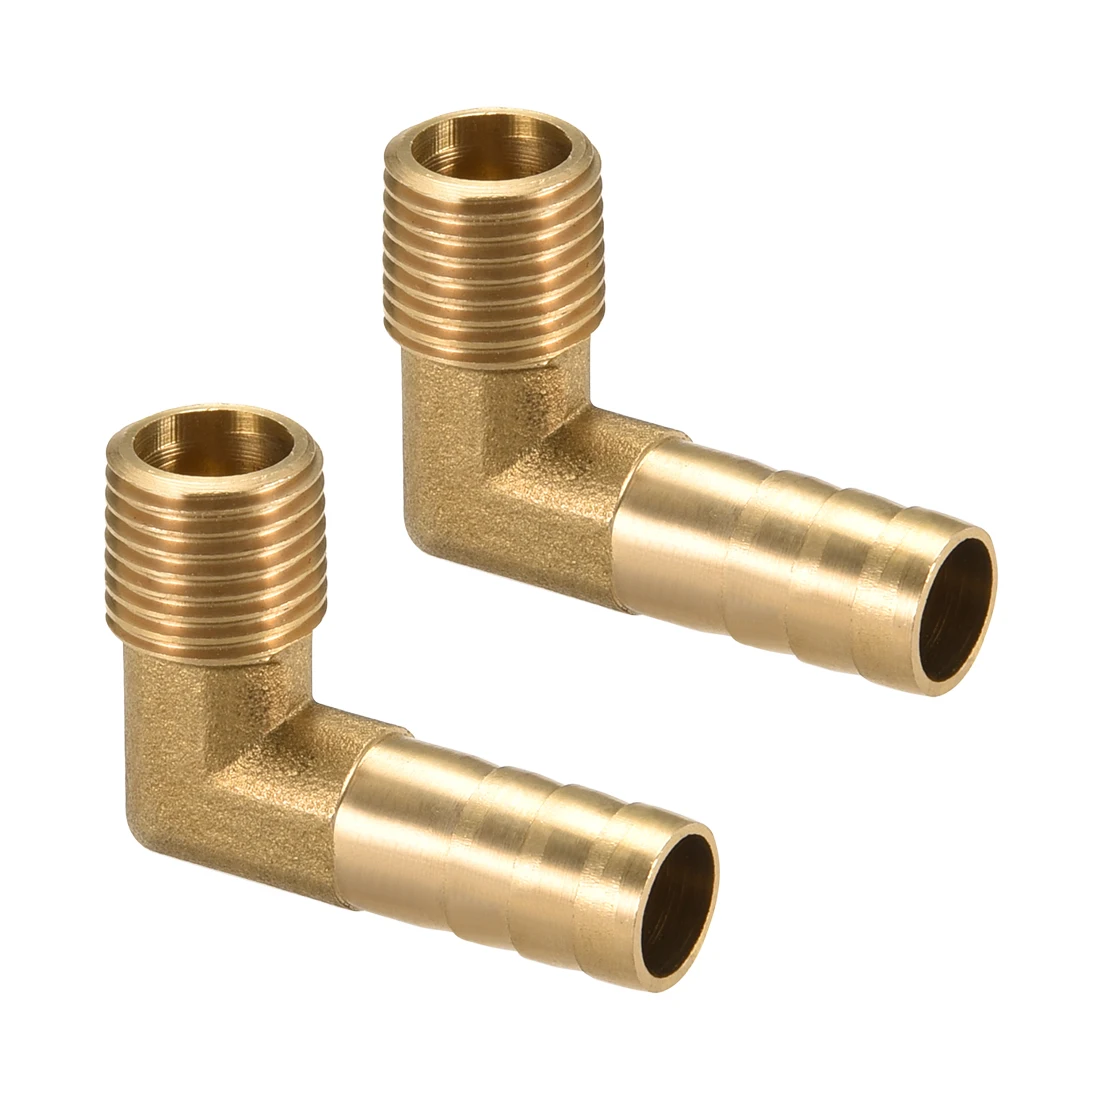 13mm Brass Barbed 90 Degree Elbow Fuel Gas Air Water Hose Joiner Adapter Fitting 